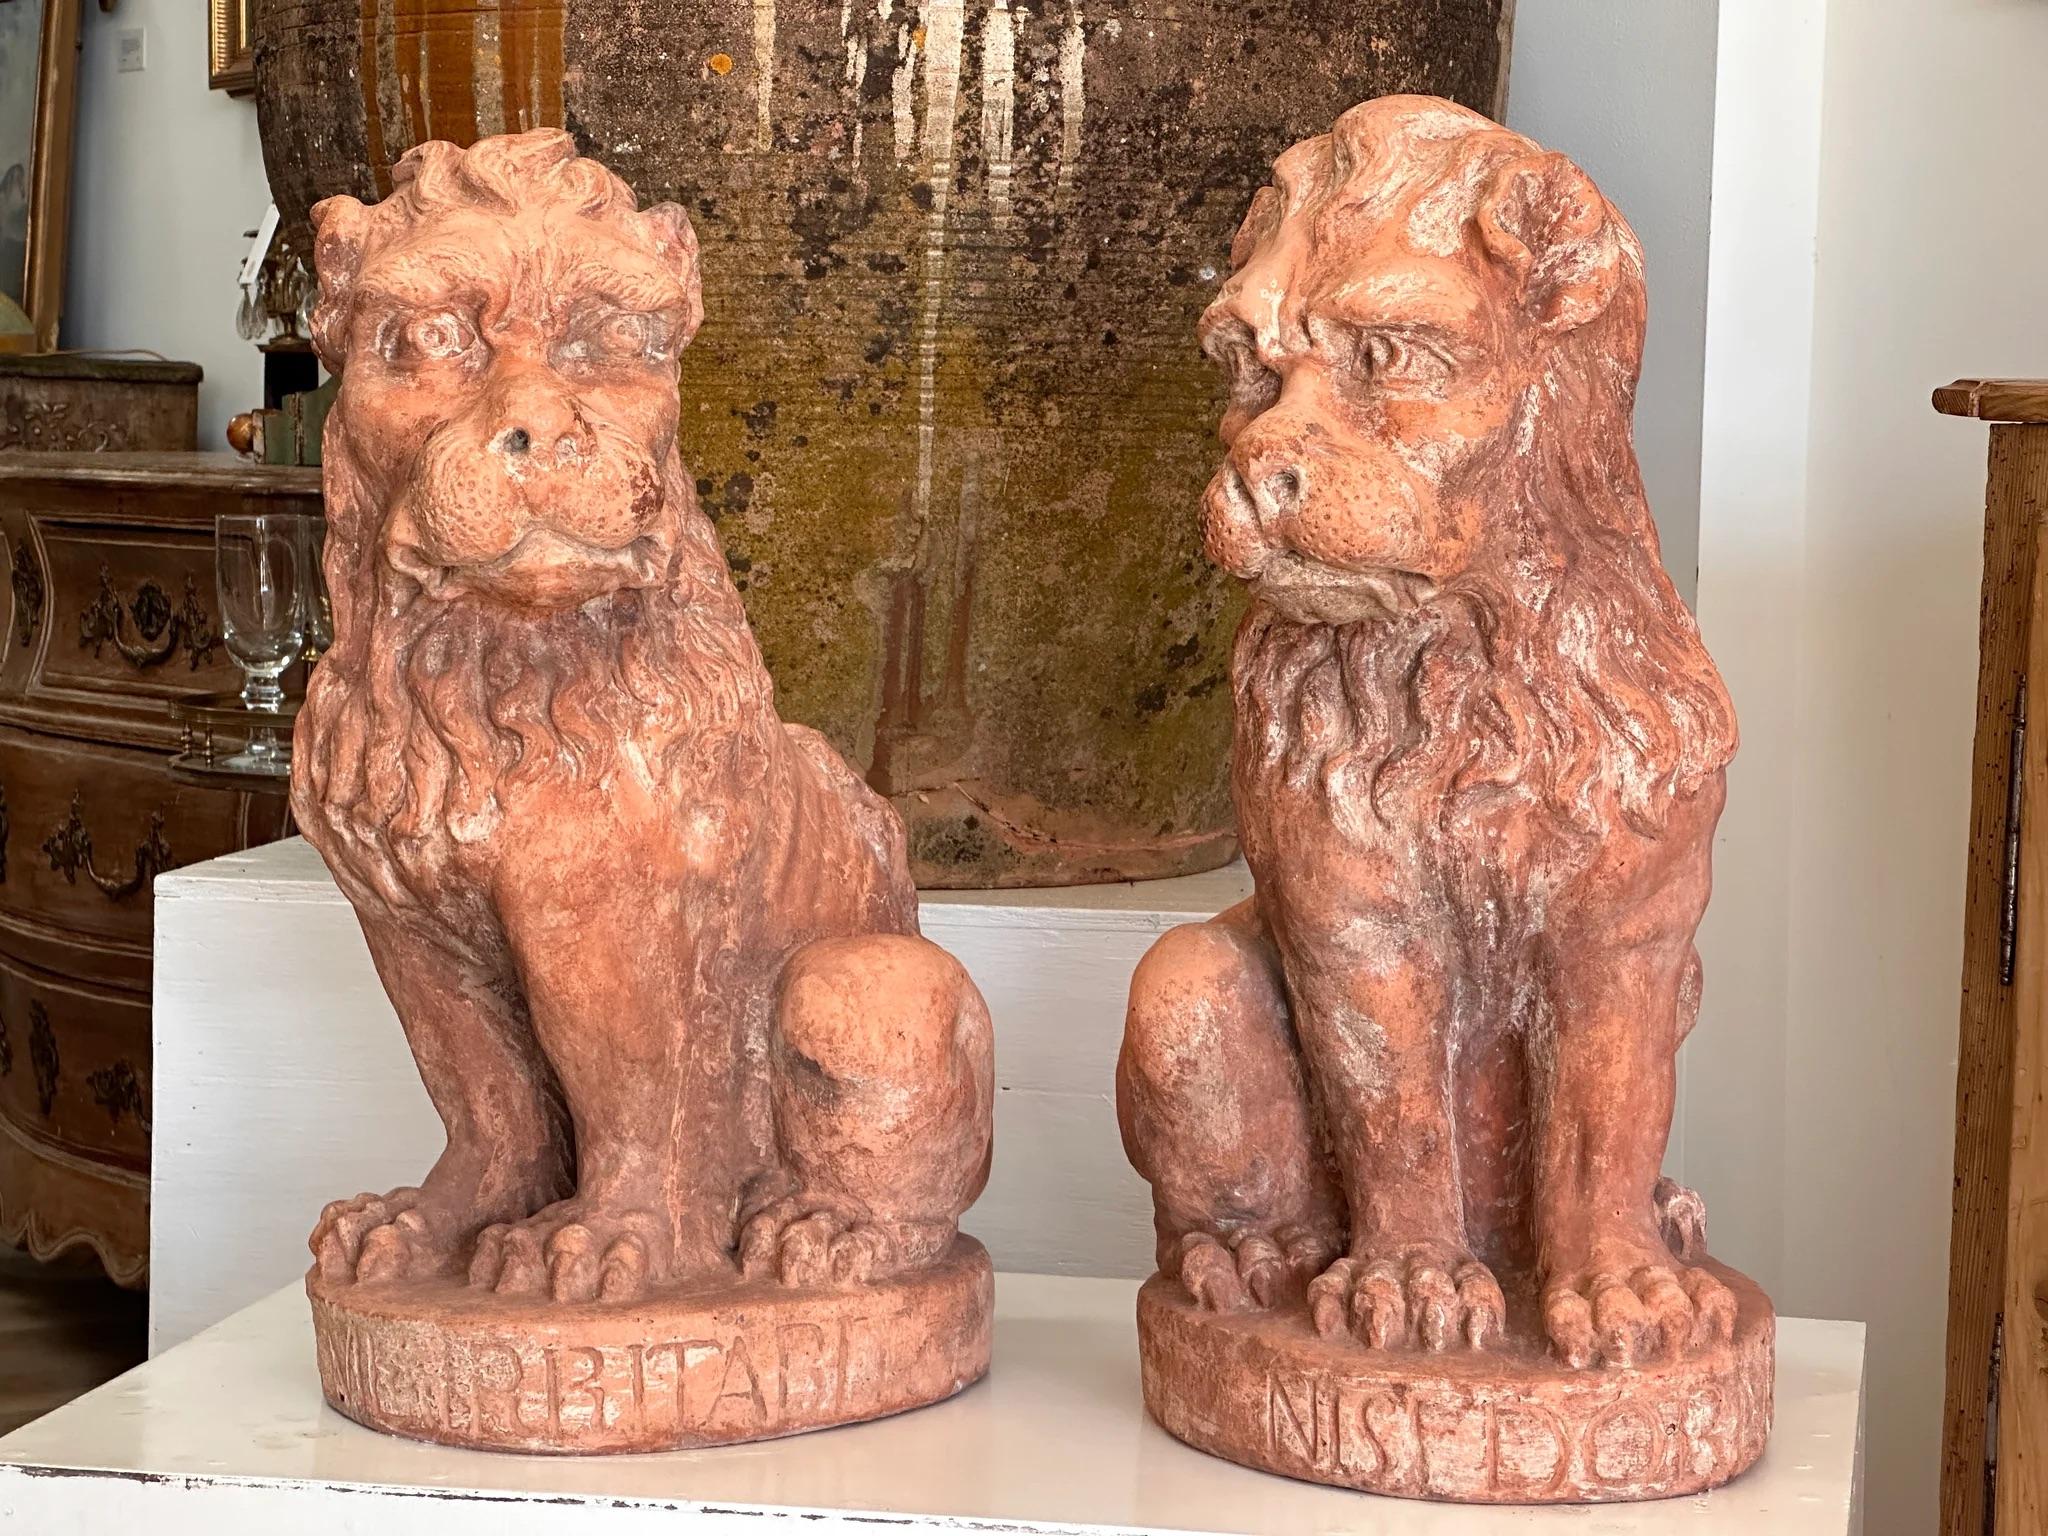 Pair of 19th Century Terra Cotta Lions, c. 1860, possibly earlier, hand modeled, likely Italian or possibly French.  For garden or indoor use.  Each modeled sitting on a circular base incised with Latin phrases.  25-1/2